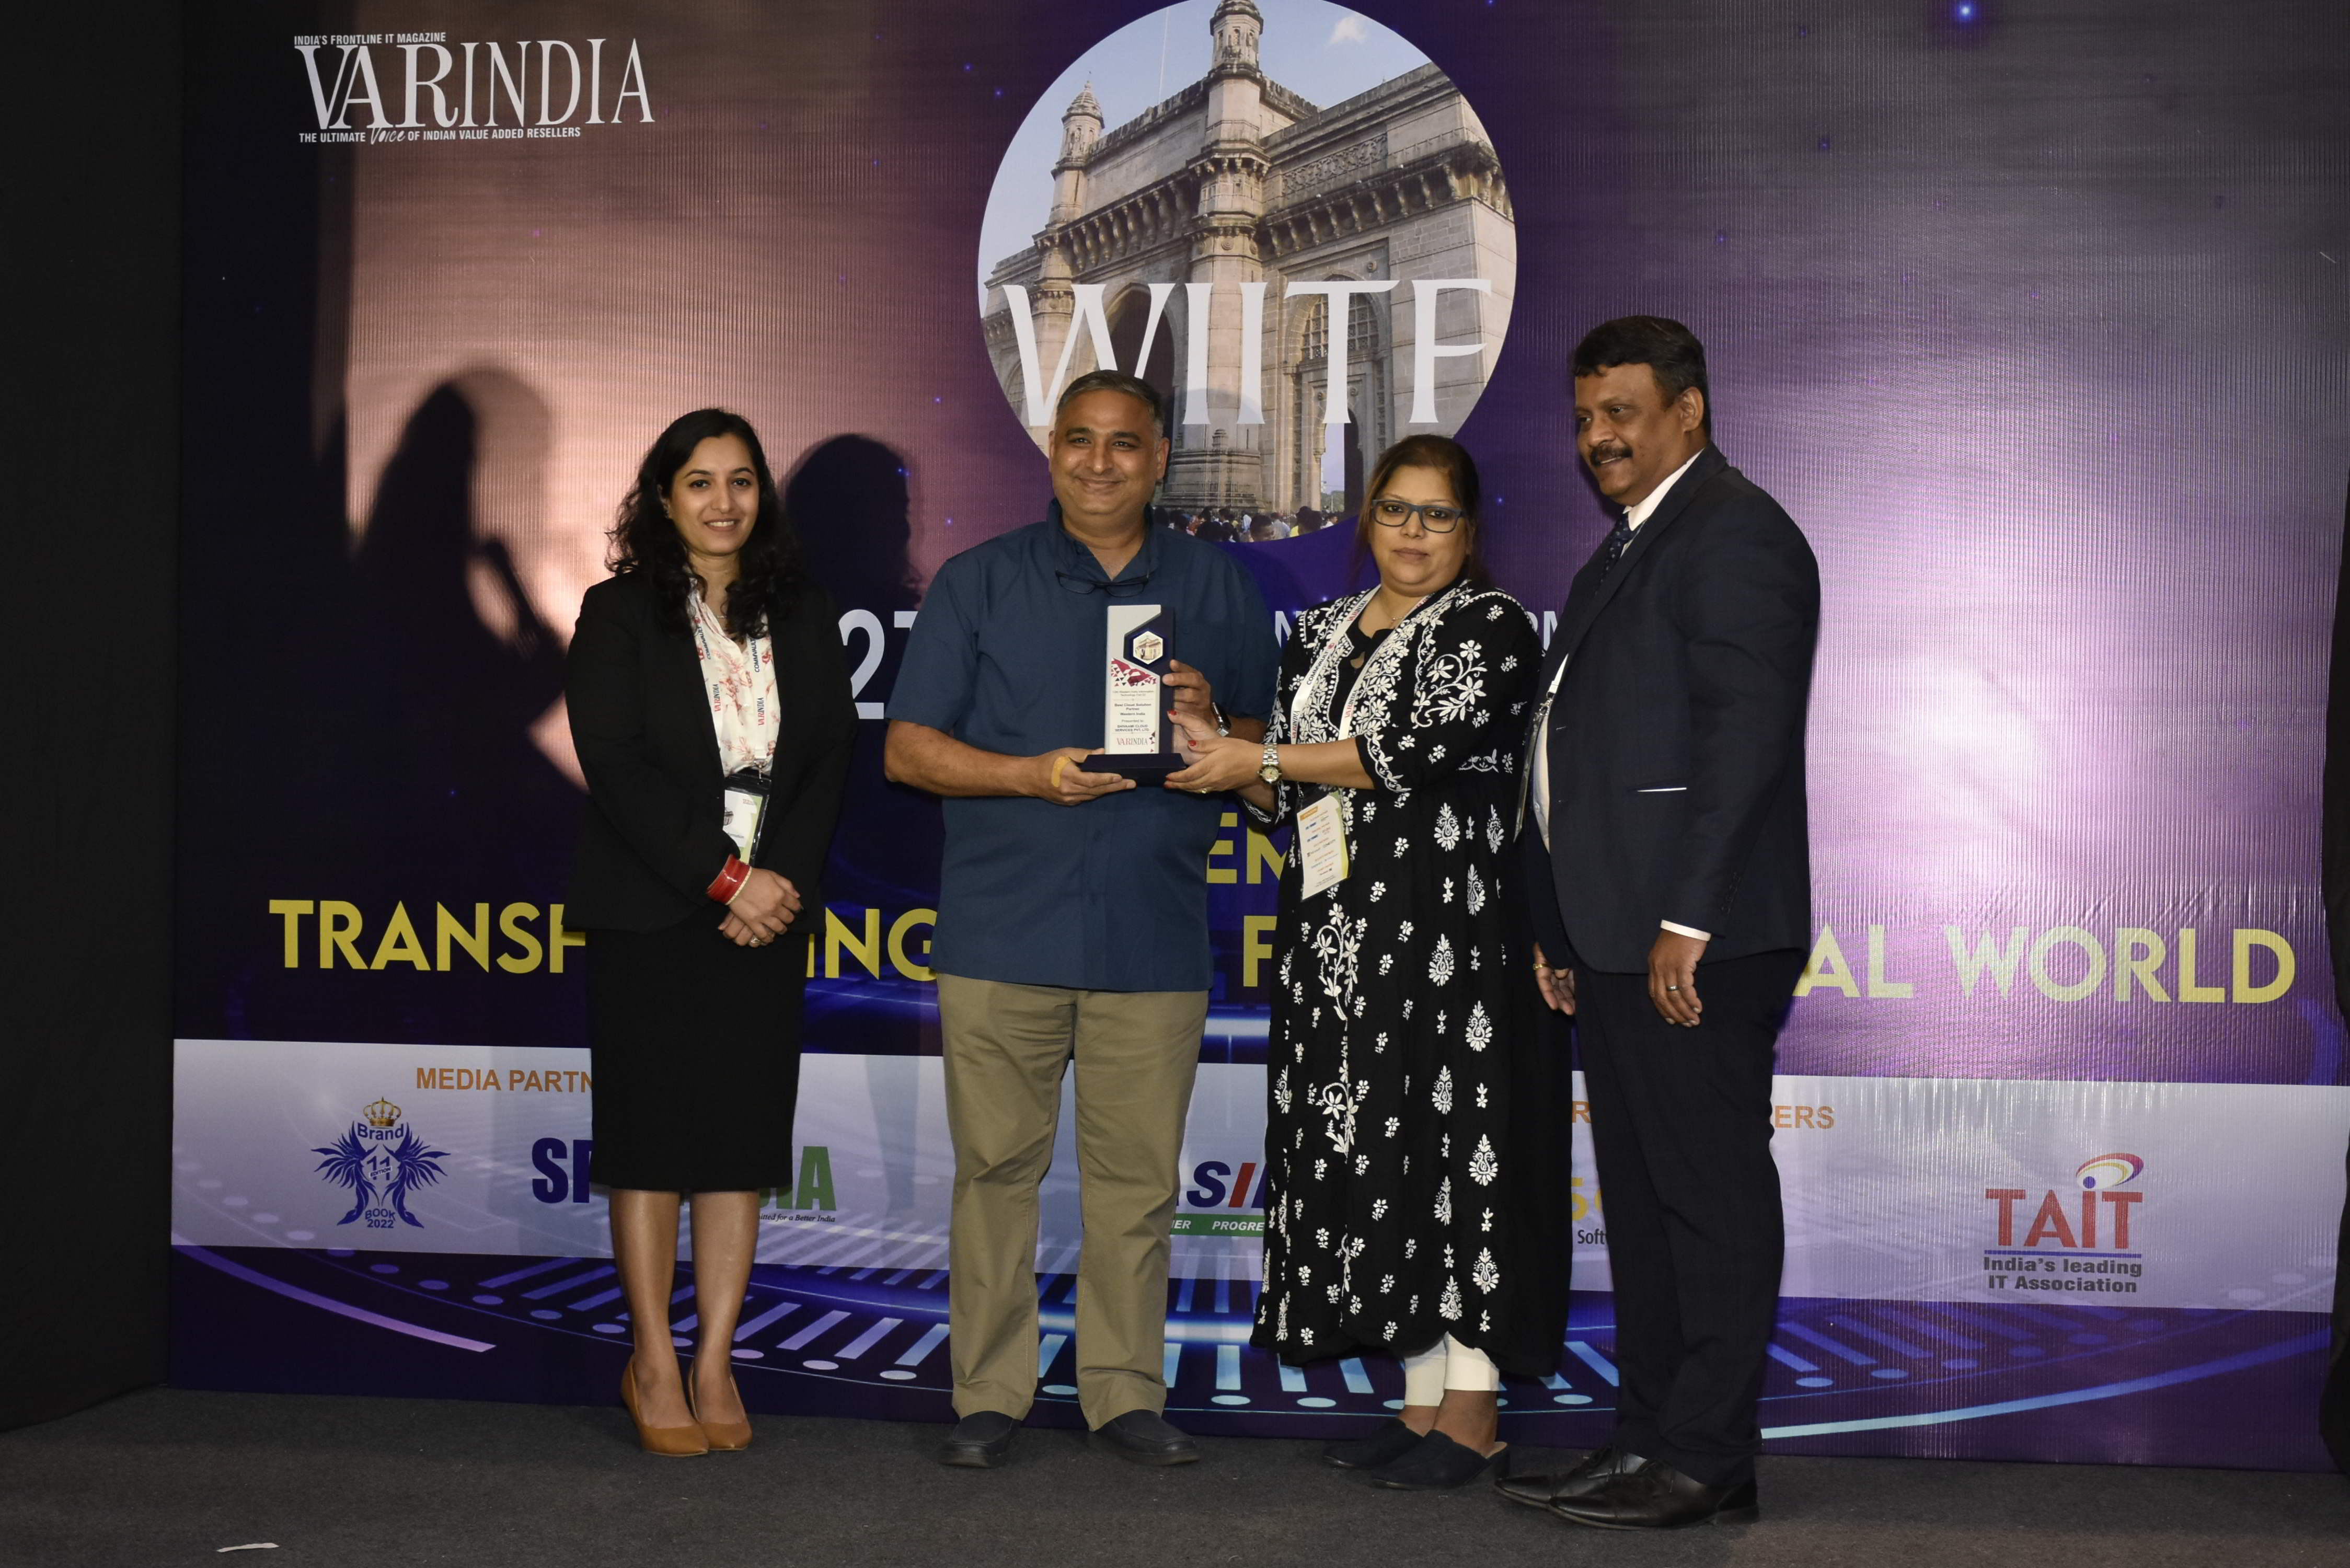 The Best Cloud Solution Partner, Western India went to Shivaami Cloud Services Pvt. Ltd.